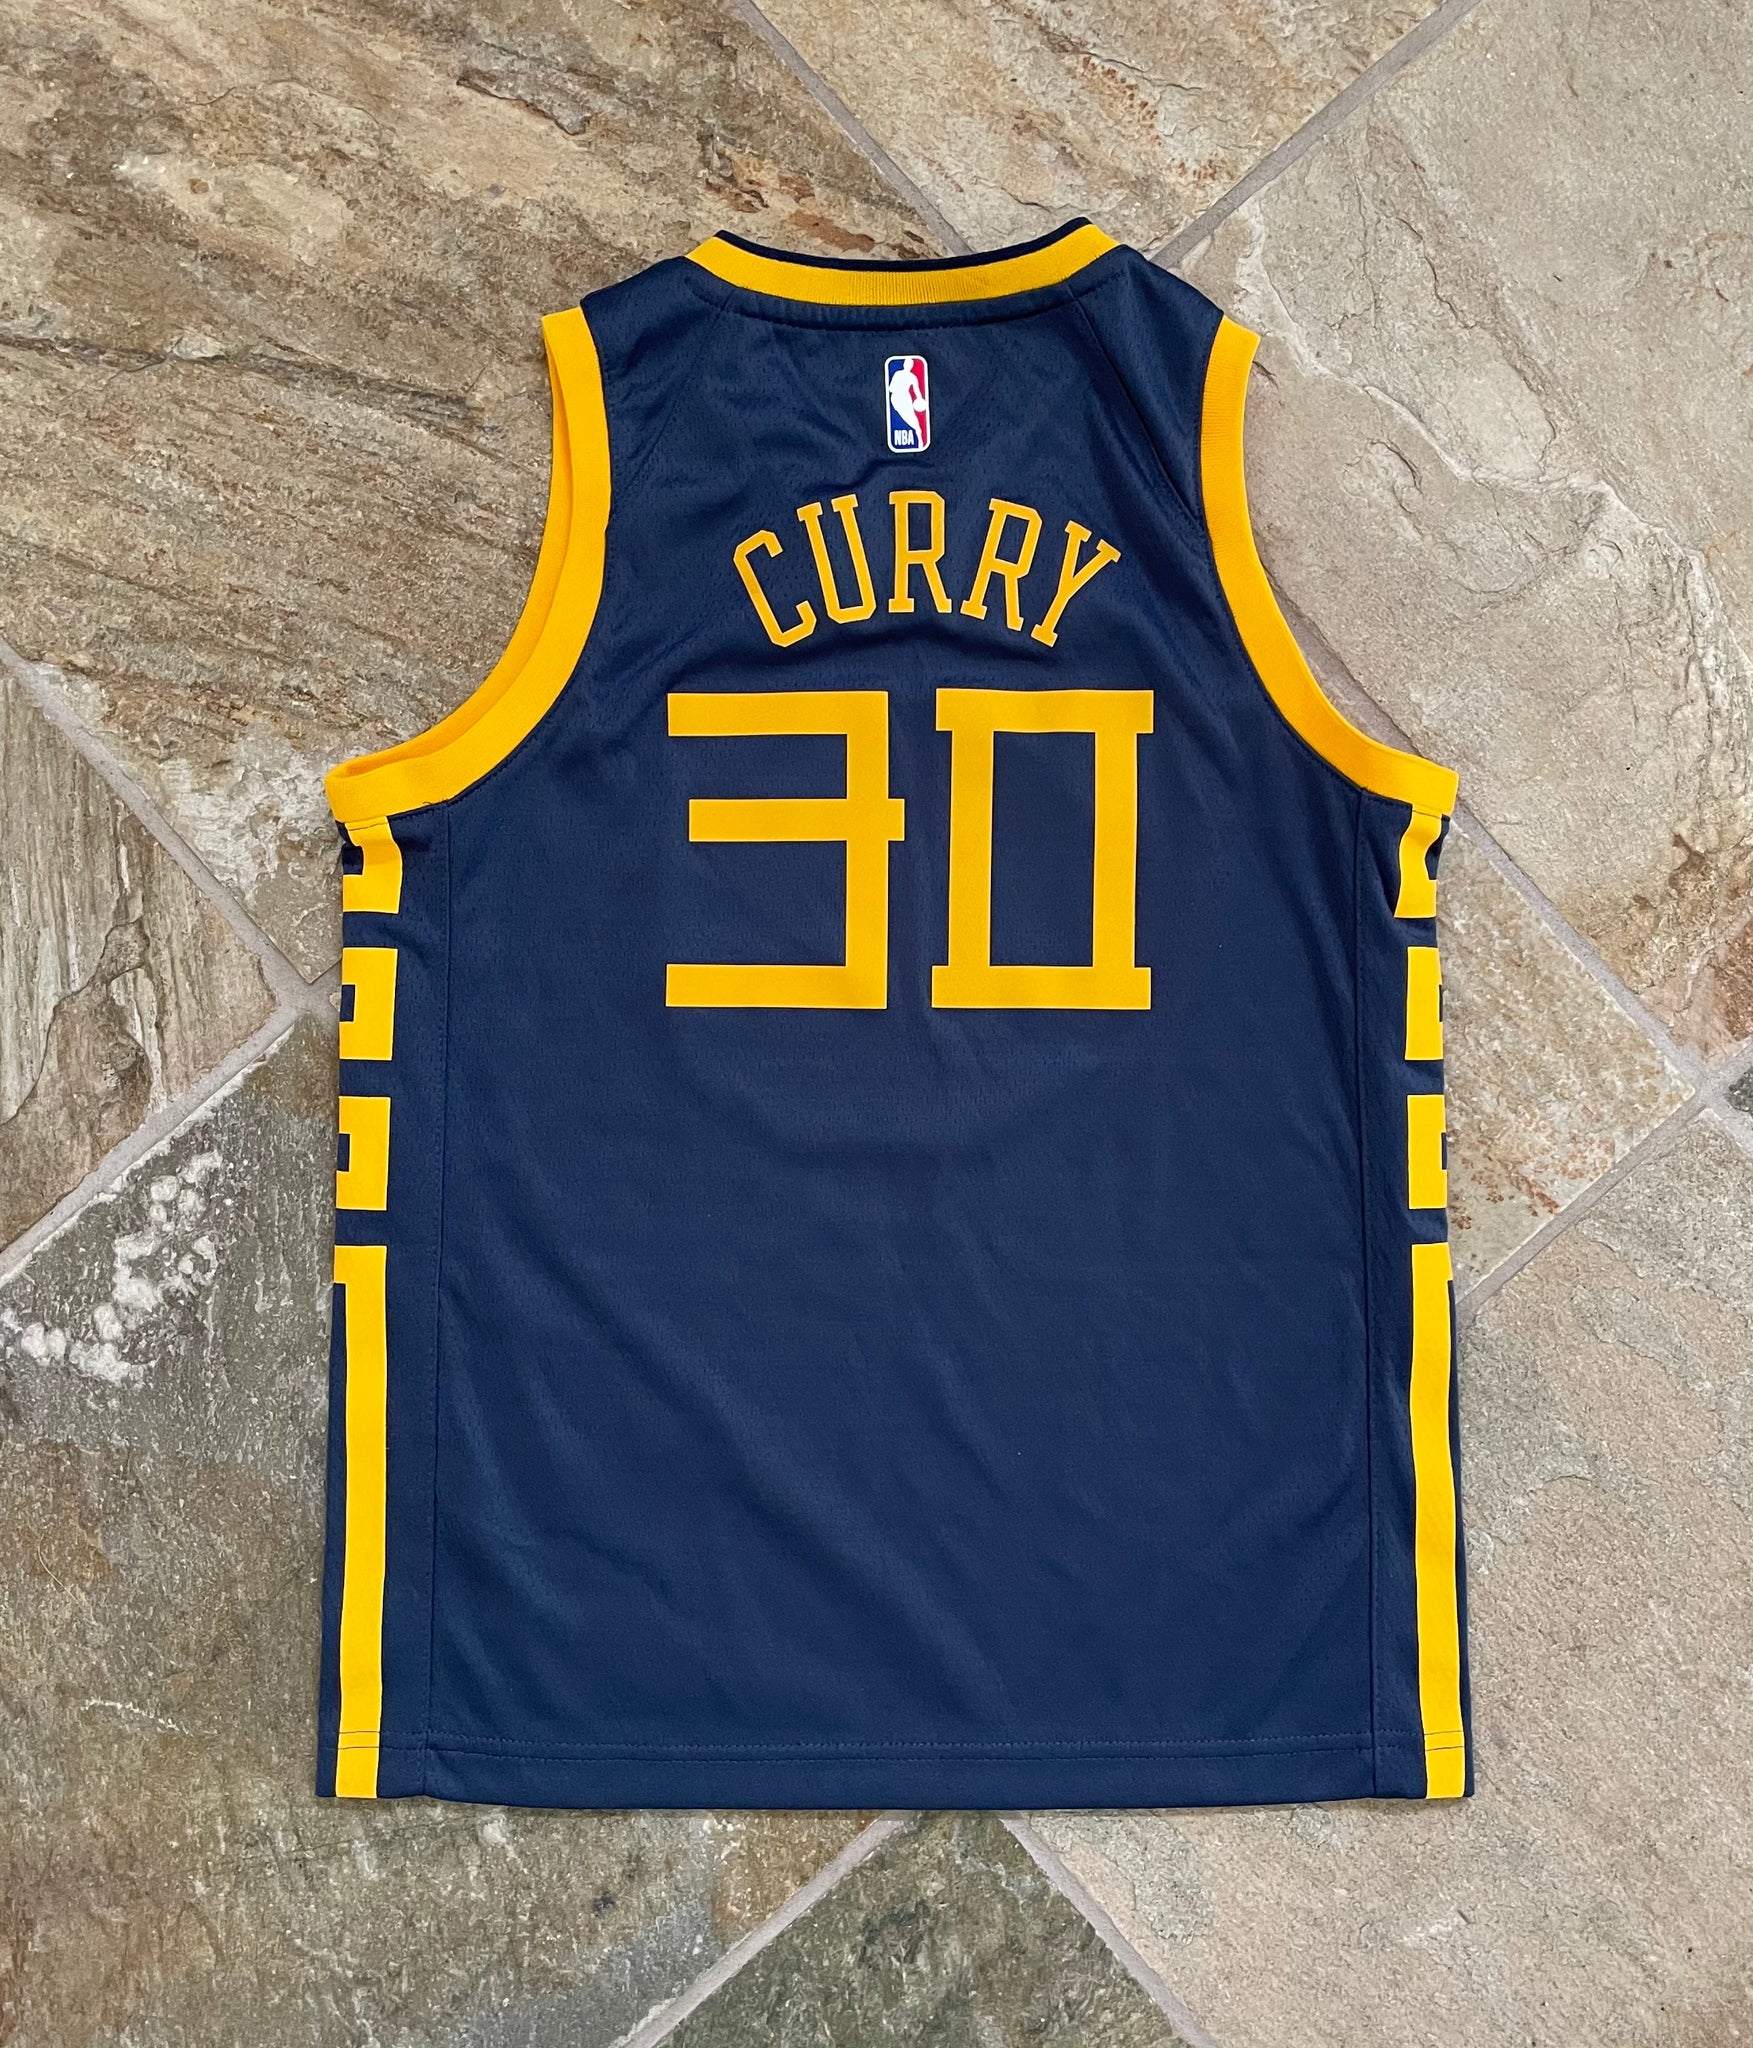 9Z2B7BY1P-CURRY] Youth Nike NBA GS Warriors Chinese Heritage Stephen Curry